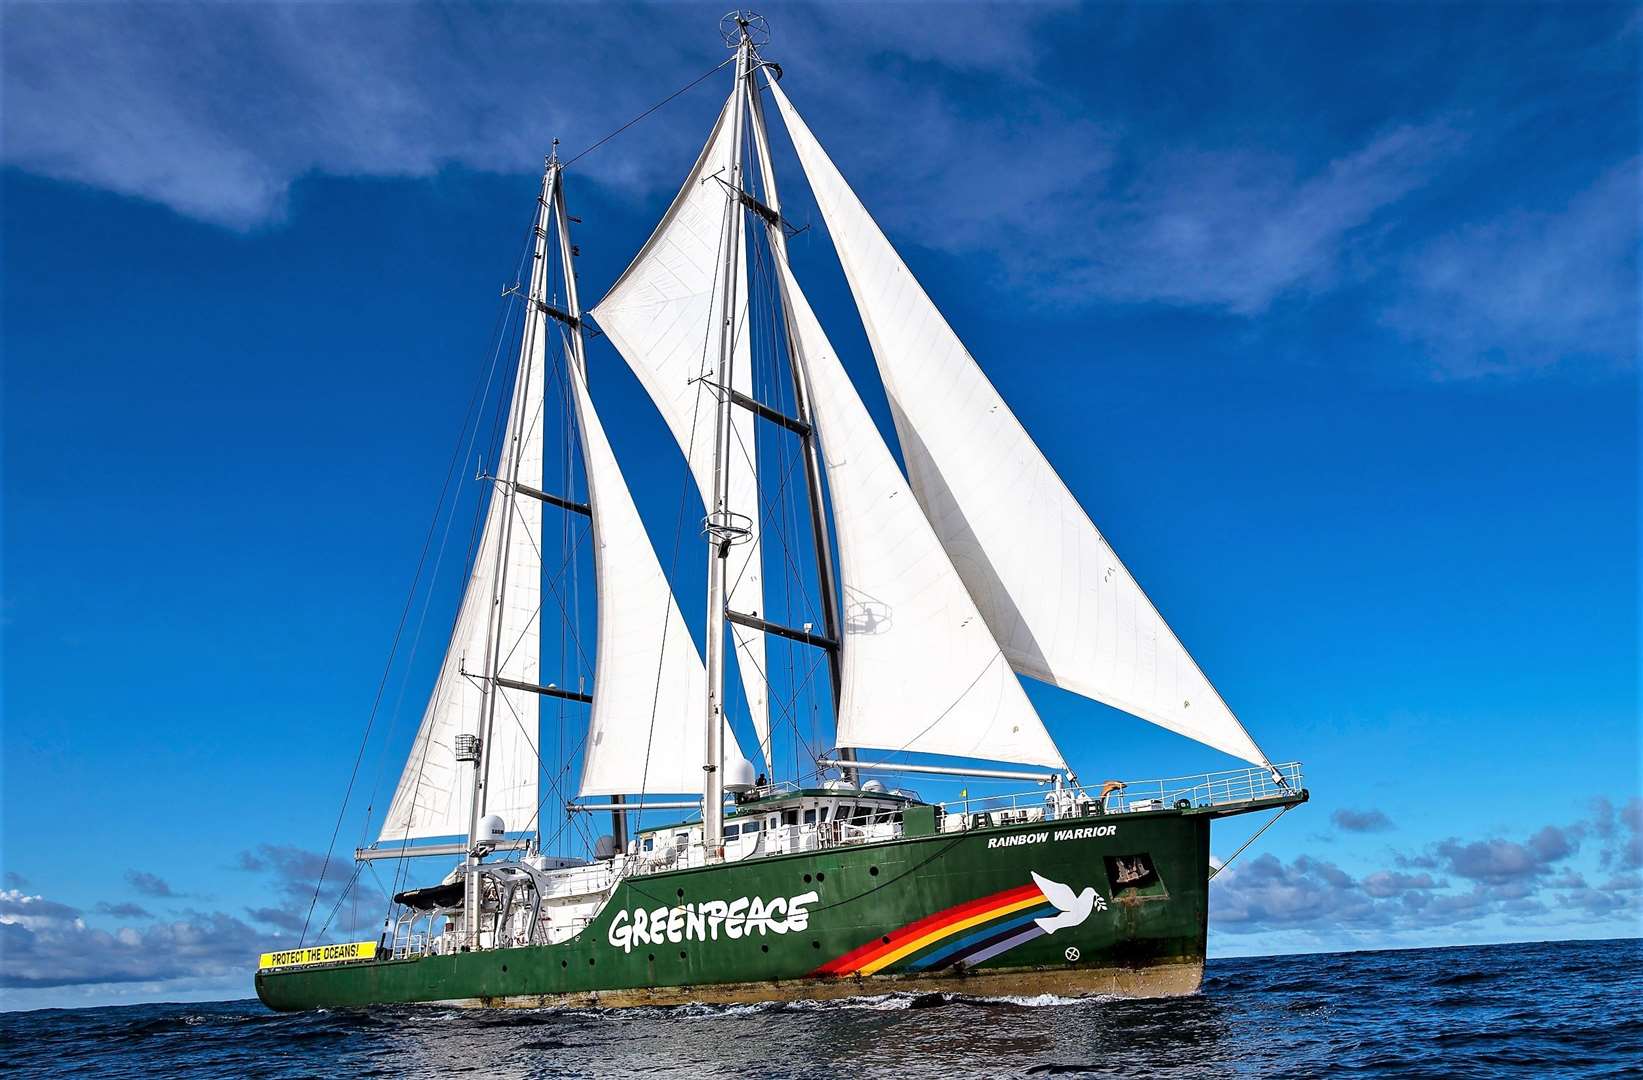 View of the Rainbow Warrior with full sails in the Pacific Ocean. The Greenpeace ship was in the Clarion Clipperton Zone in the Pacific to bear witness to the deep sea mining industry. Part of the ongoing 'Protect the Oceans' campaign. Picture: Greenpeace